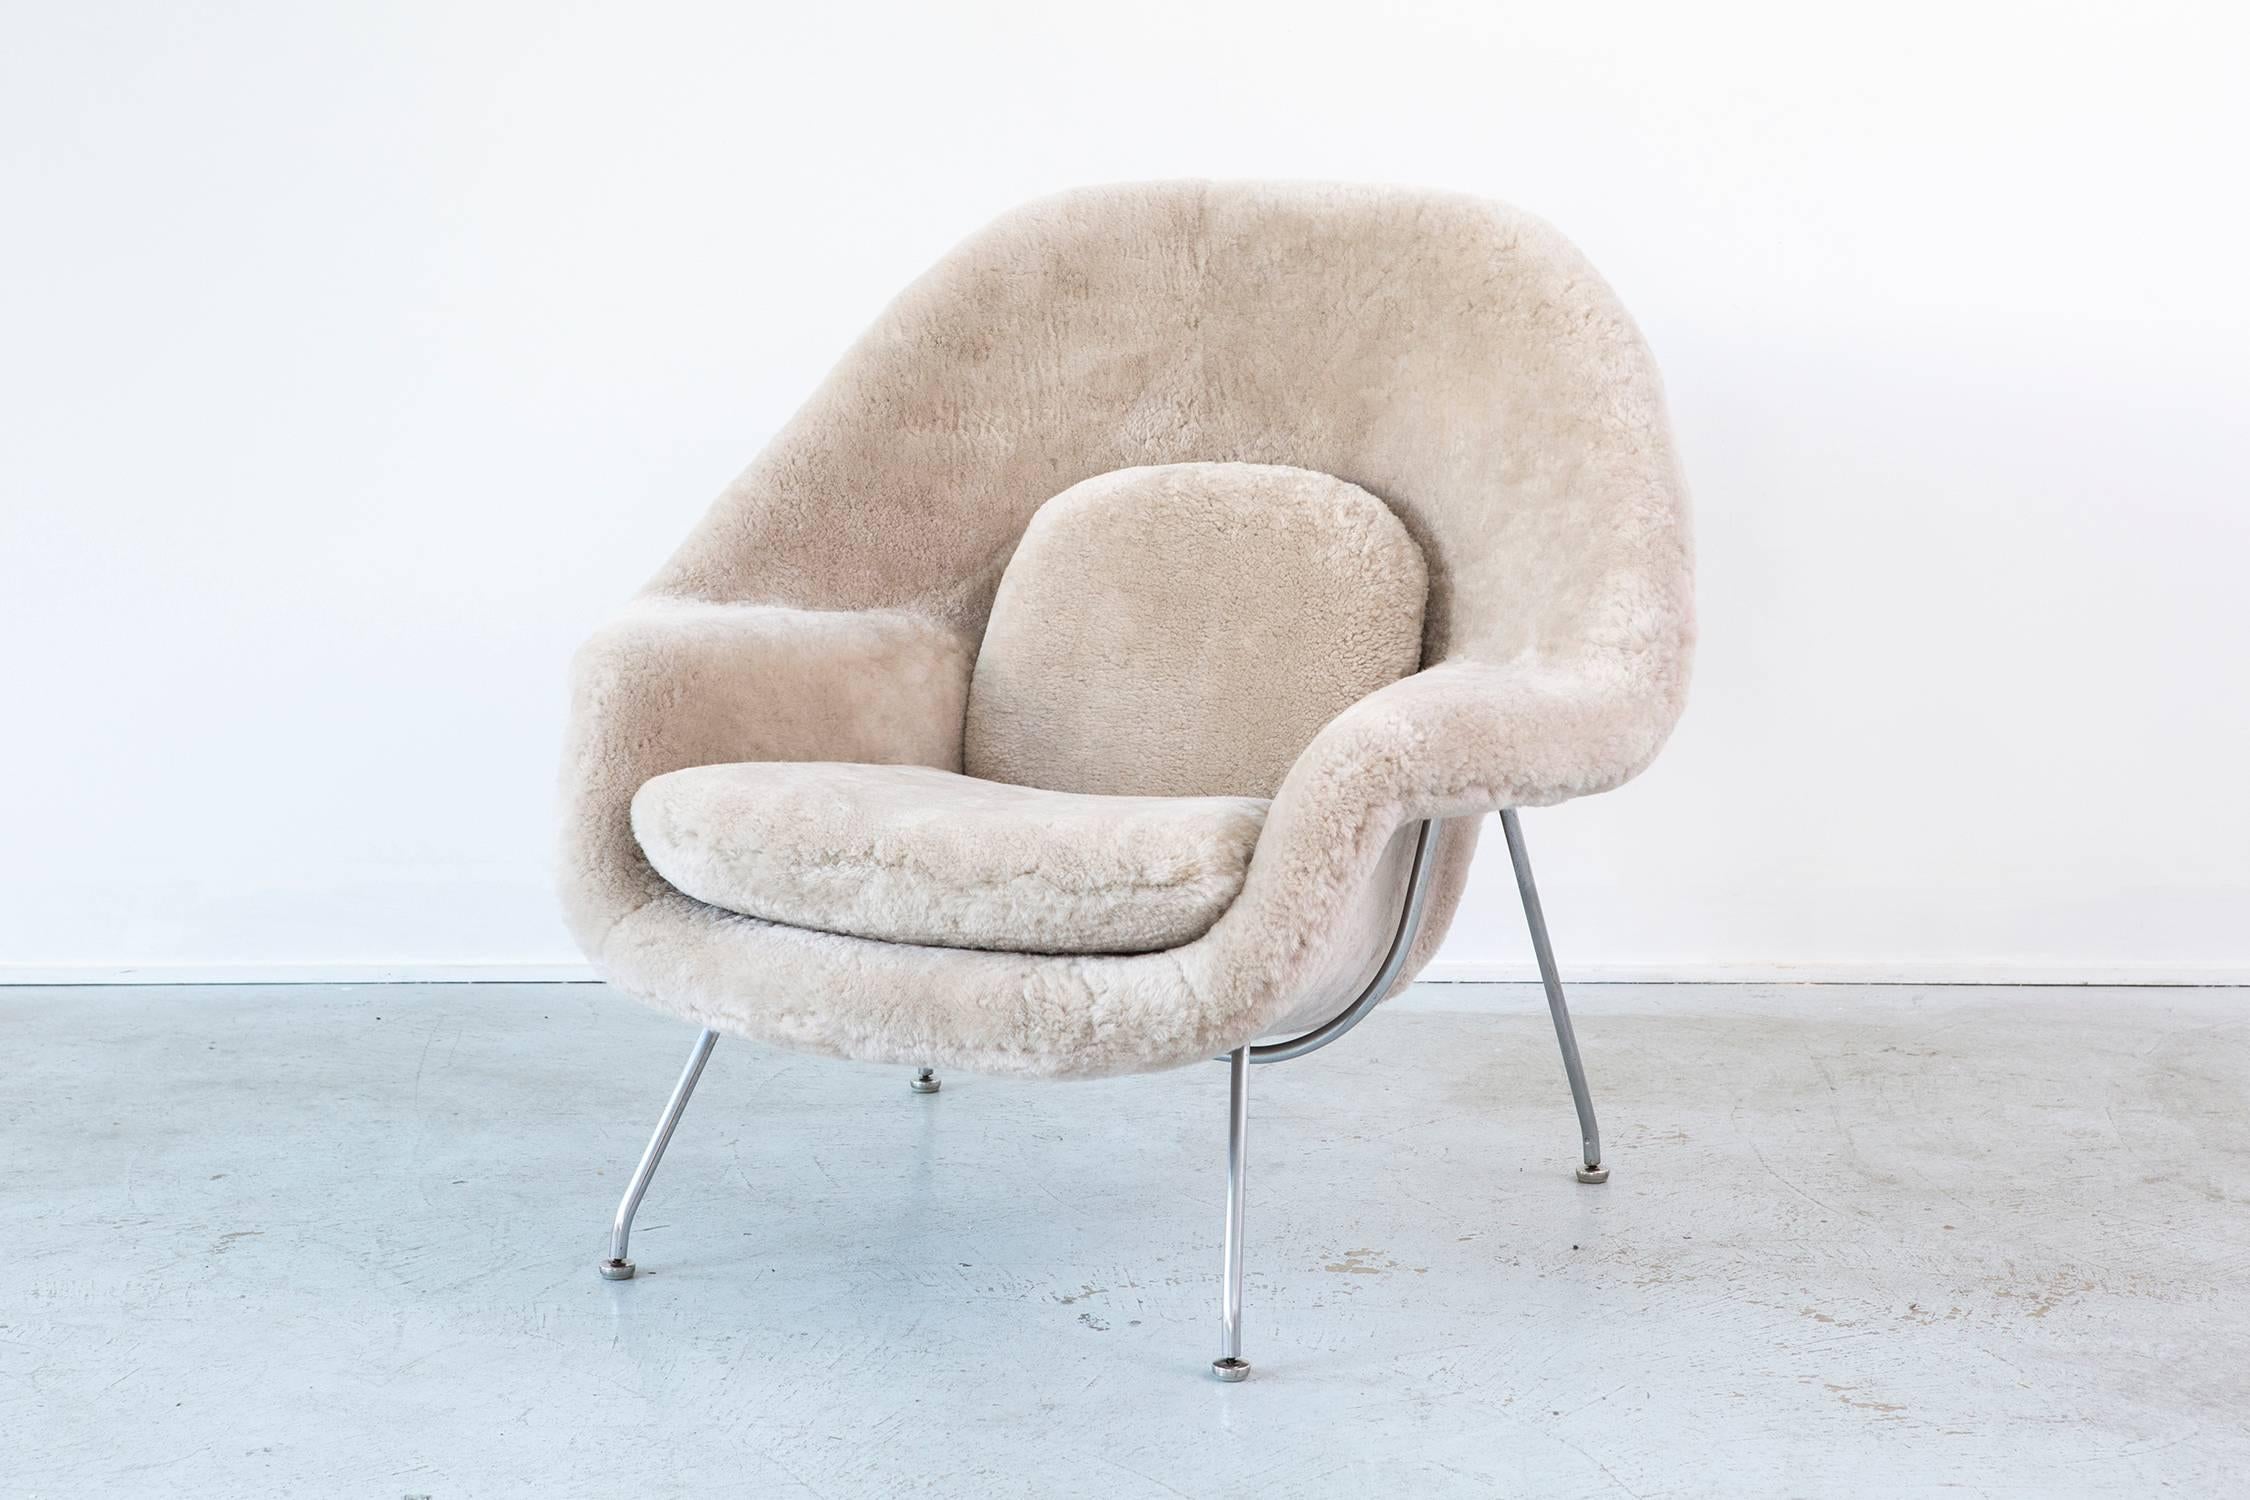 Womb chair

designed by Eero Saarinen for Knoll,

USA, d 1948 / circa 1960s.

Reupholstered in shearling and steel frame.

Measures: 35 ½